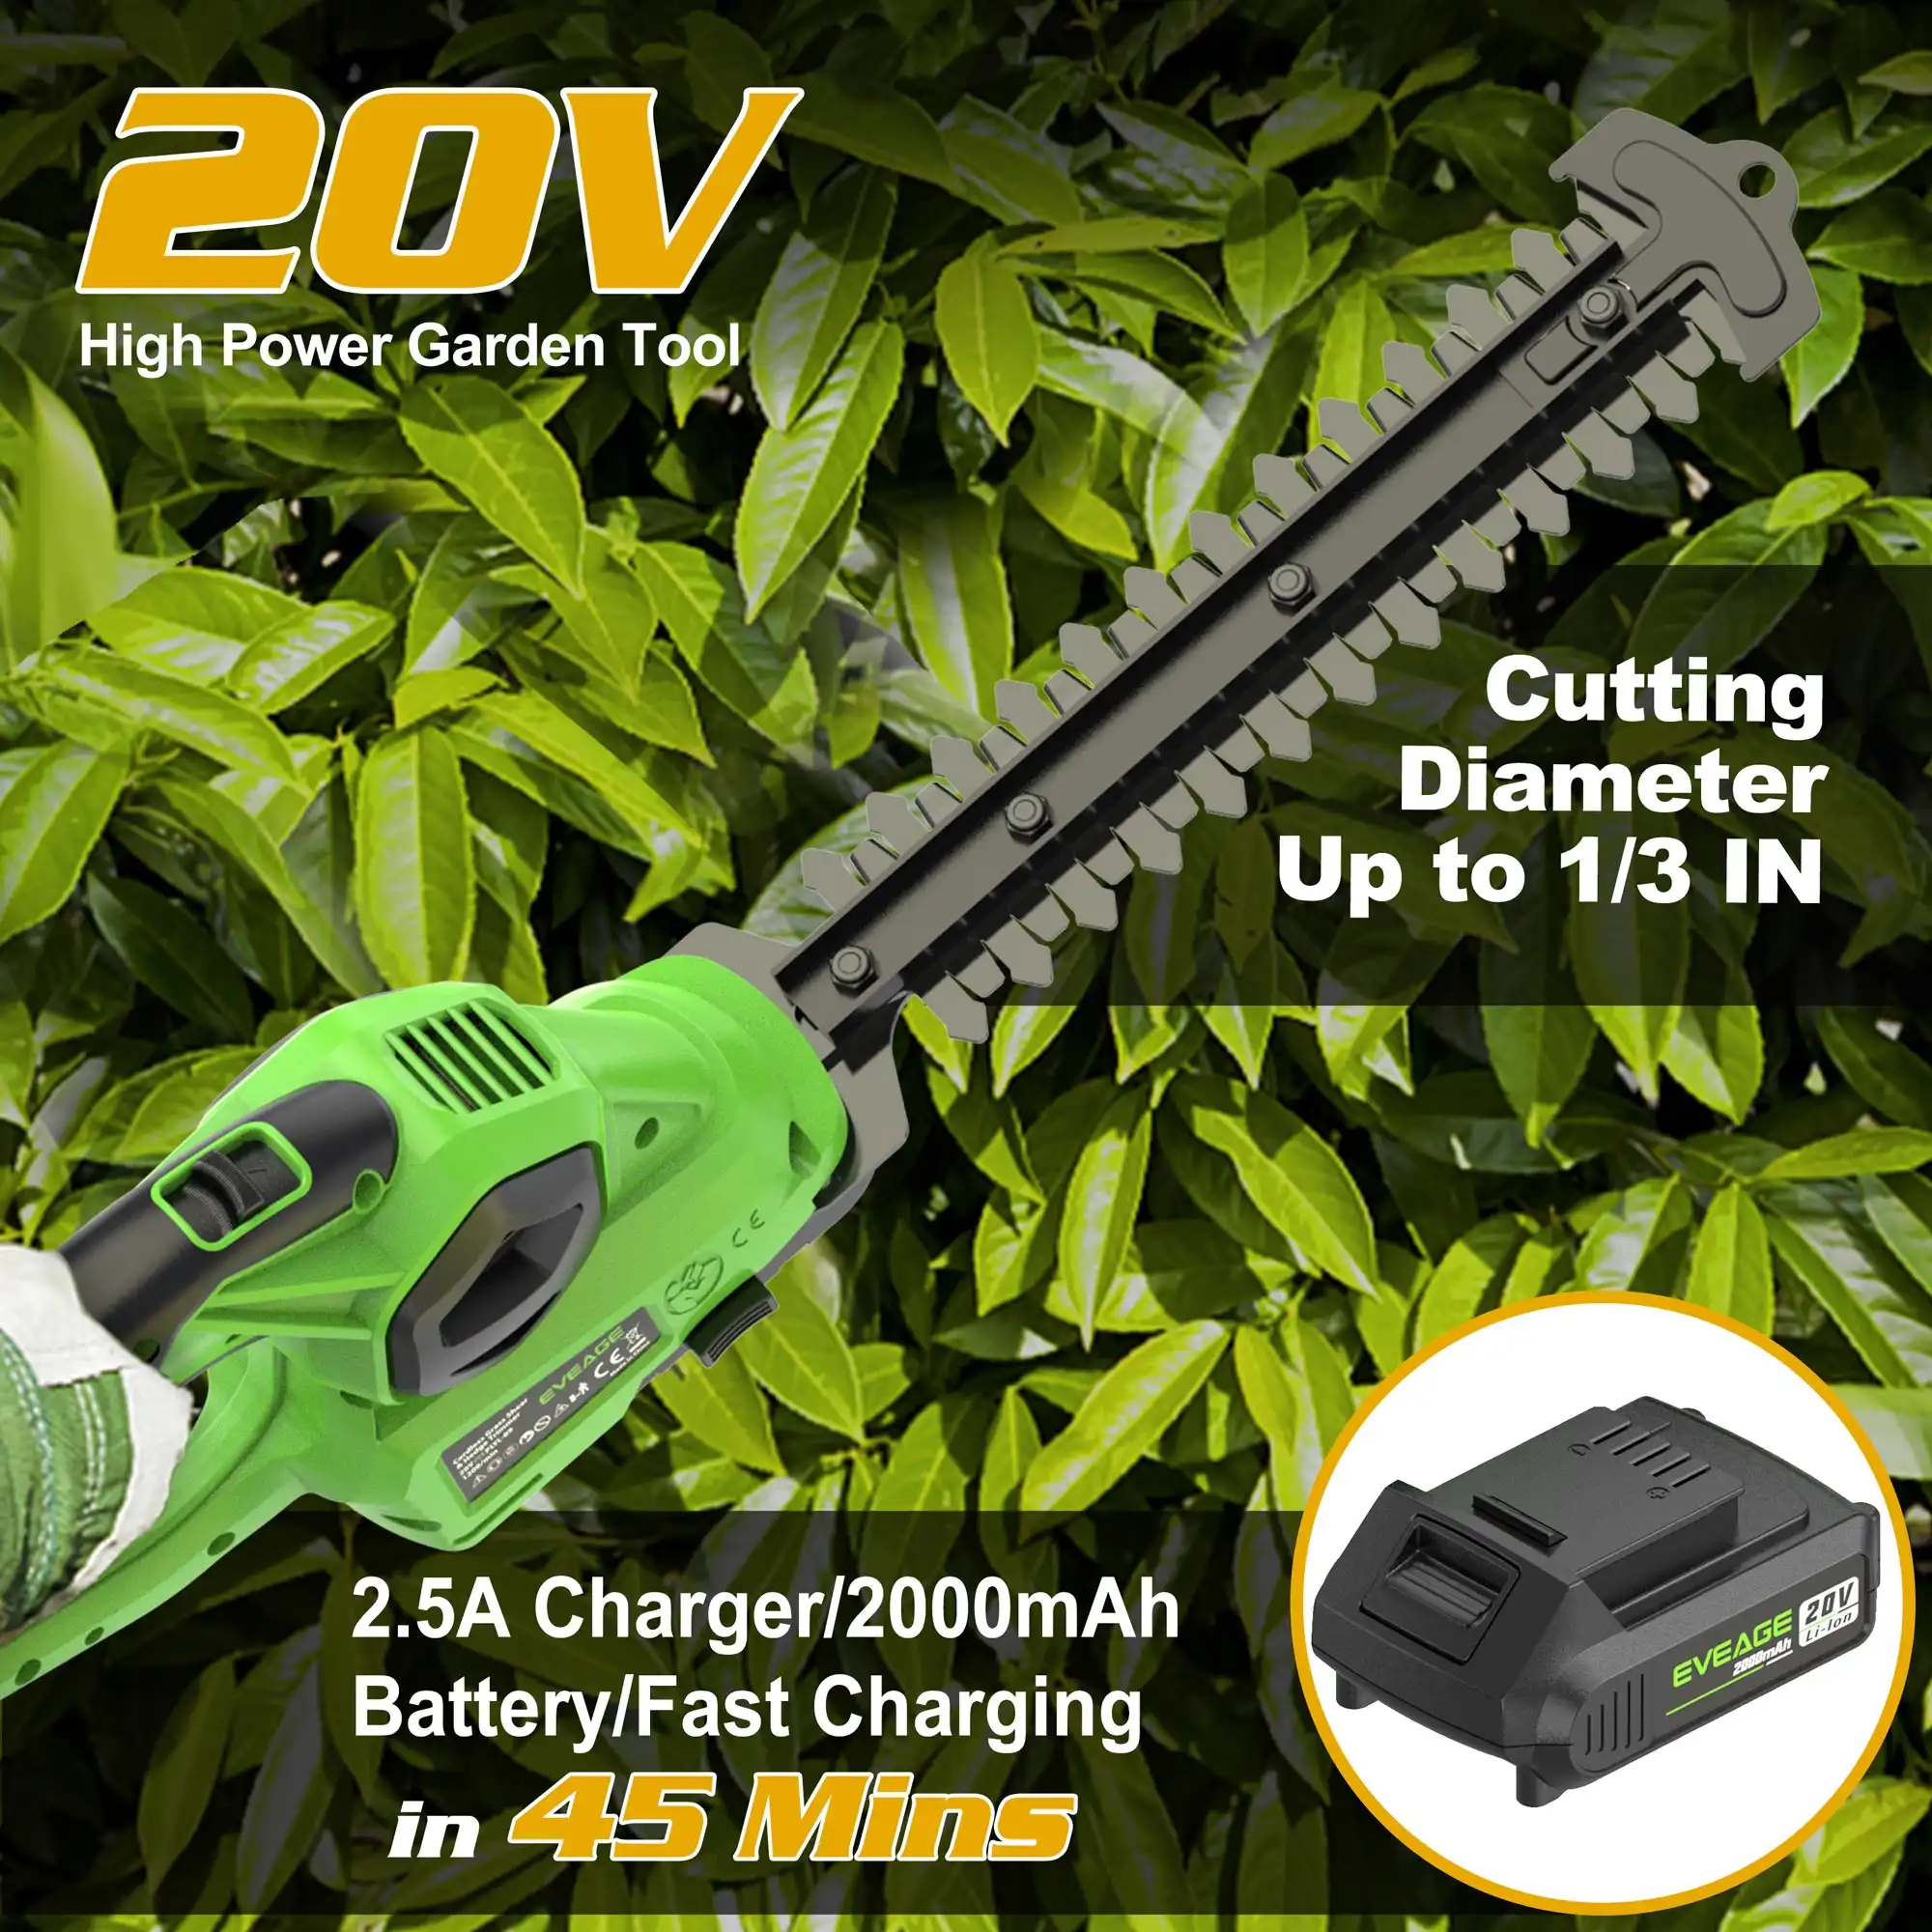 EVEAGE 20V Cordless Grass Shears, Handheld Grass Trimmer, 2 in 1 Electric Grass Clippers & Power Hedge Trimmers Cordless